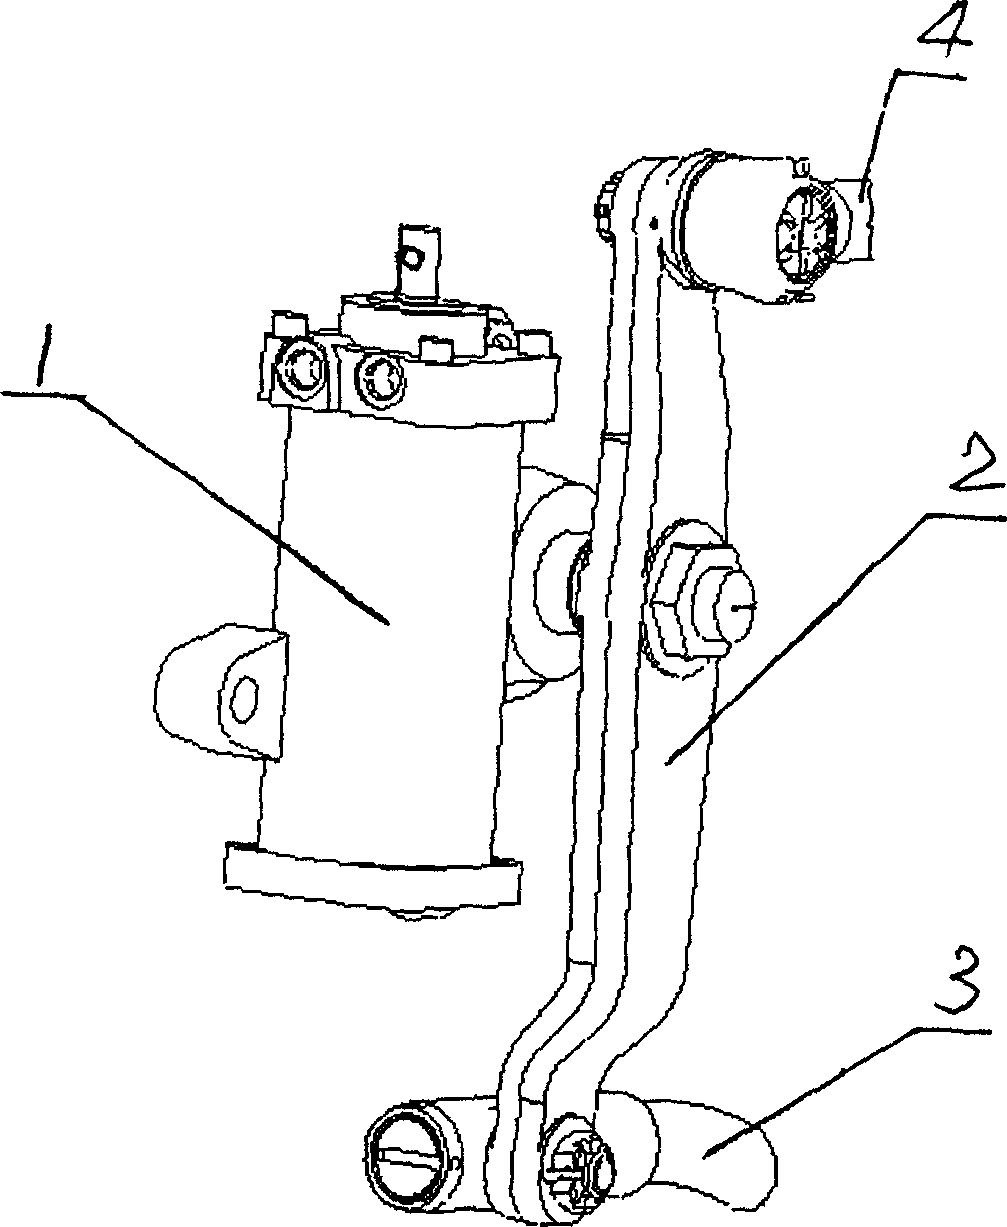 Automobile steering system